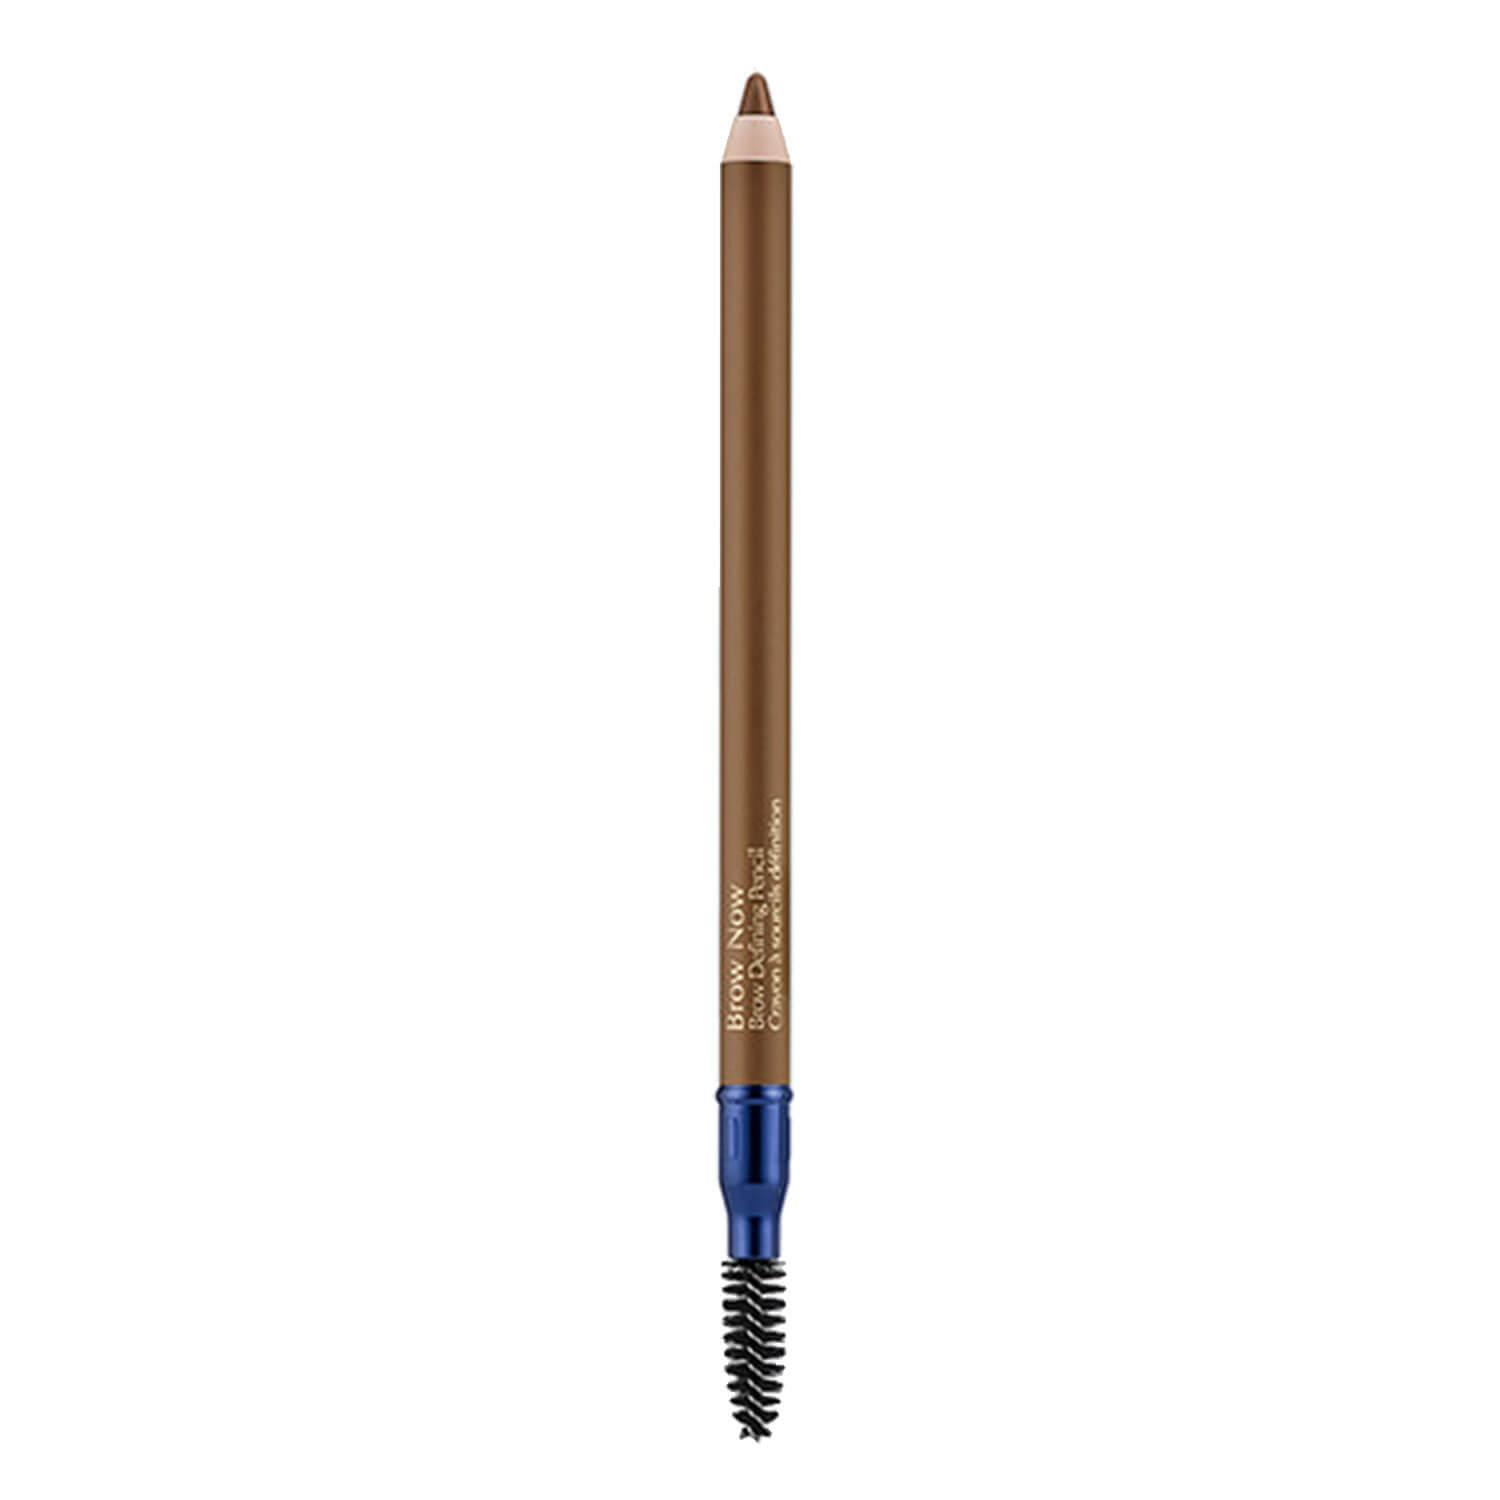 Brow Now - Brow Defining Pencil 03 Brunette